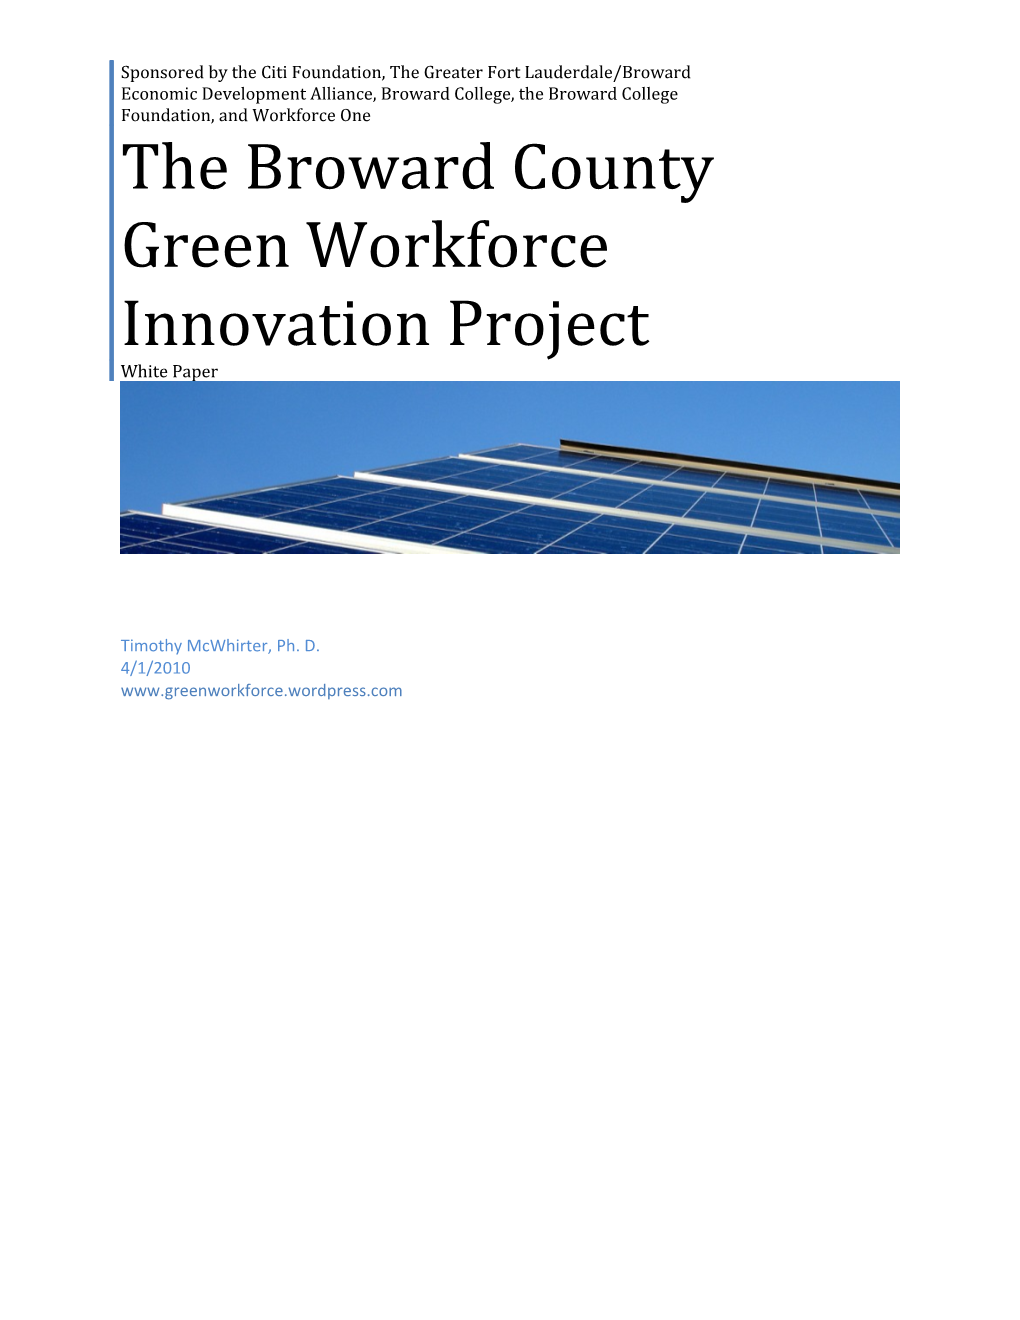 The Broward County Green Workforce Innovation Project